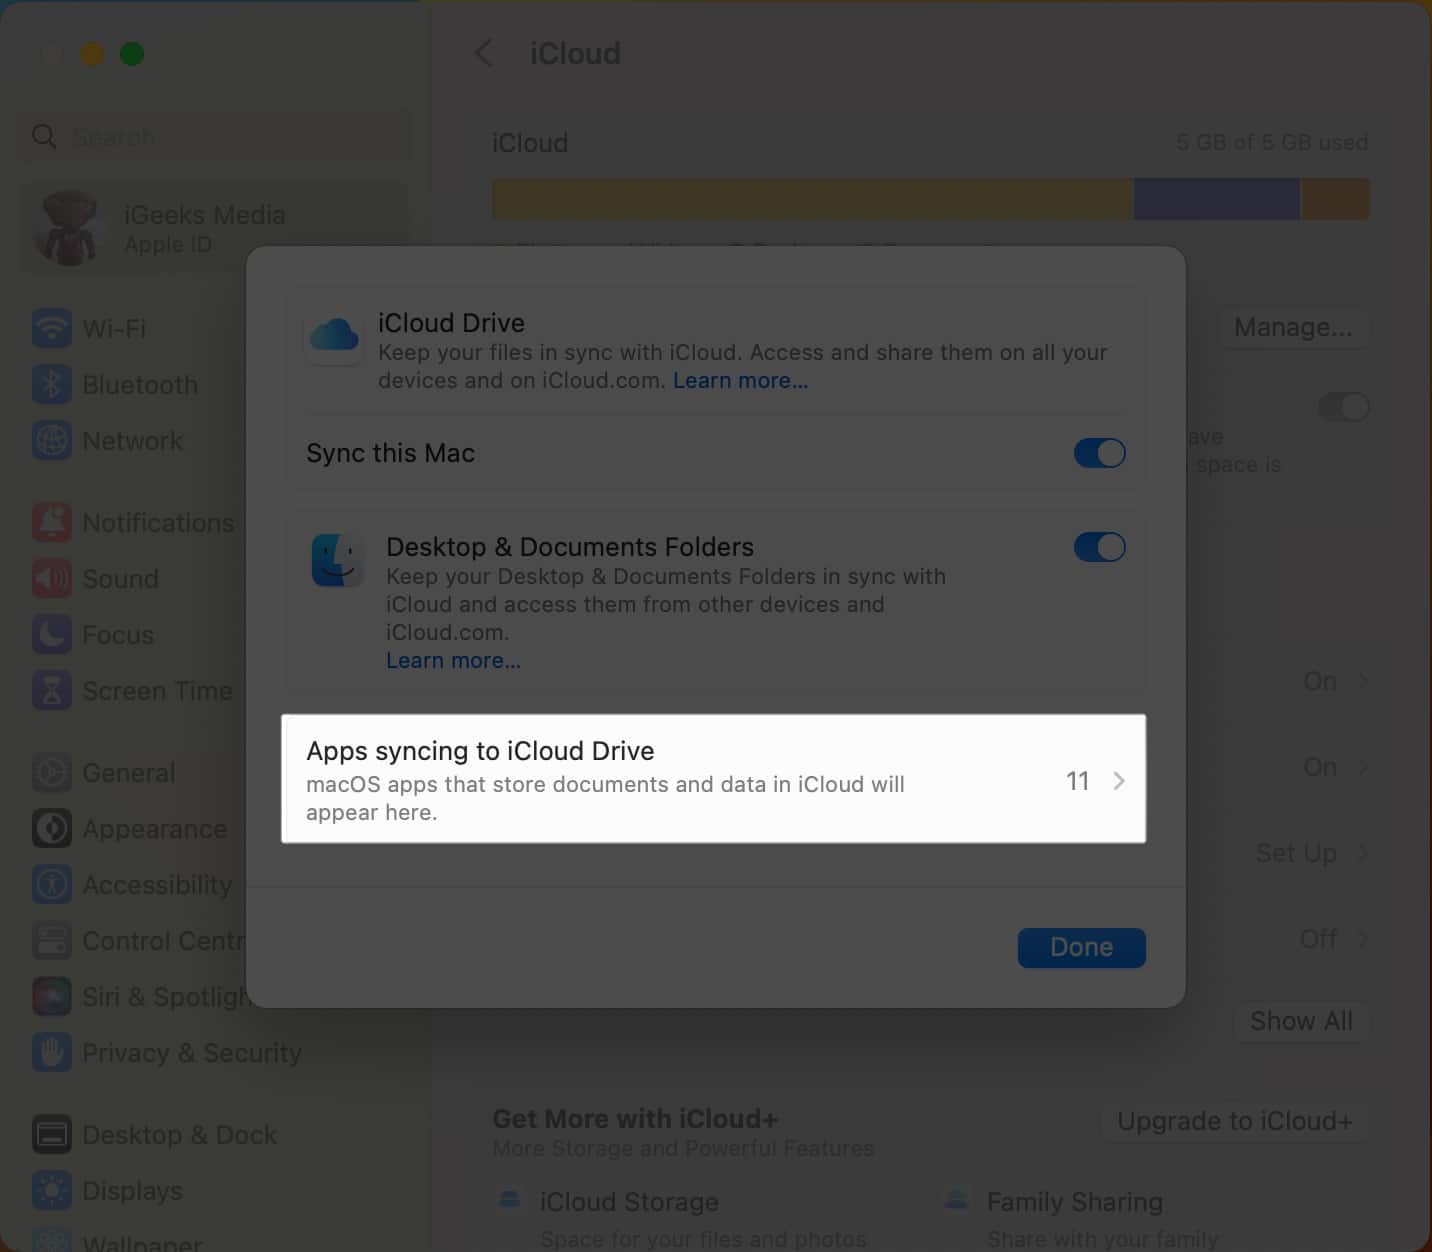 Click Apps syncing to iCloud Drive